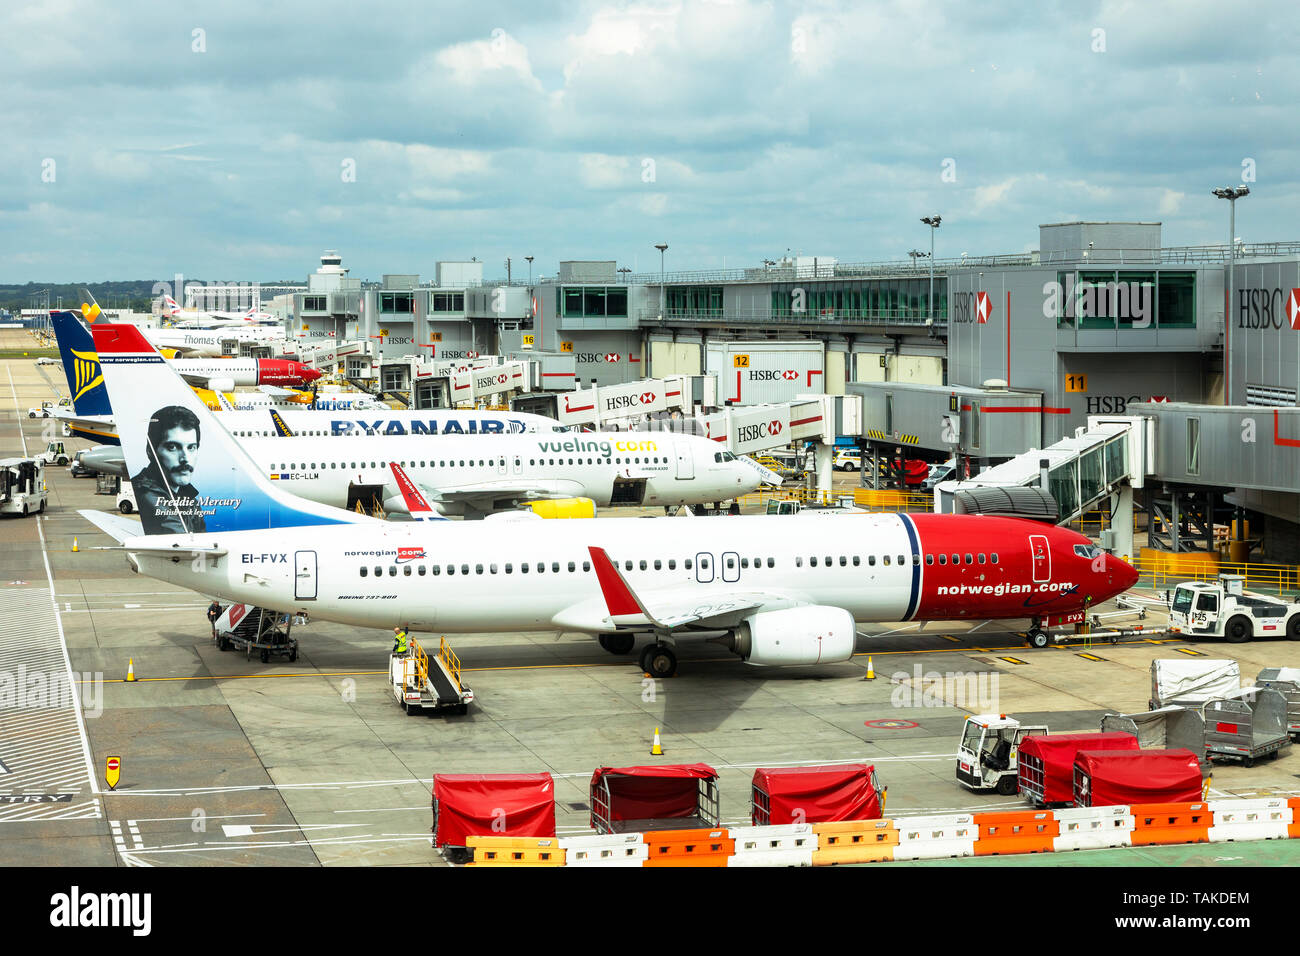 Norwegian Boeing 737-800, registered EI-FVX being loaded at London Gatwick airport, London, England, UK Stock Photo